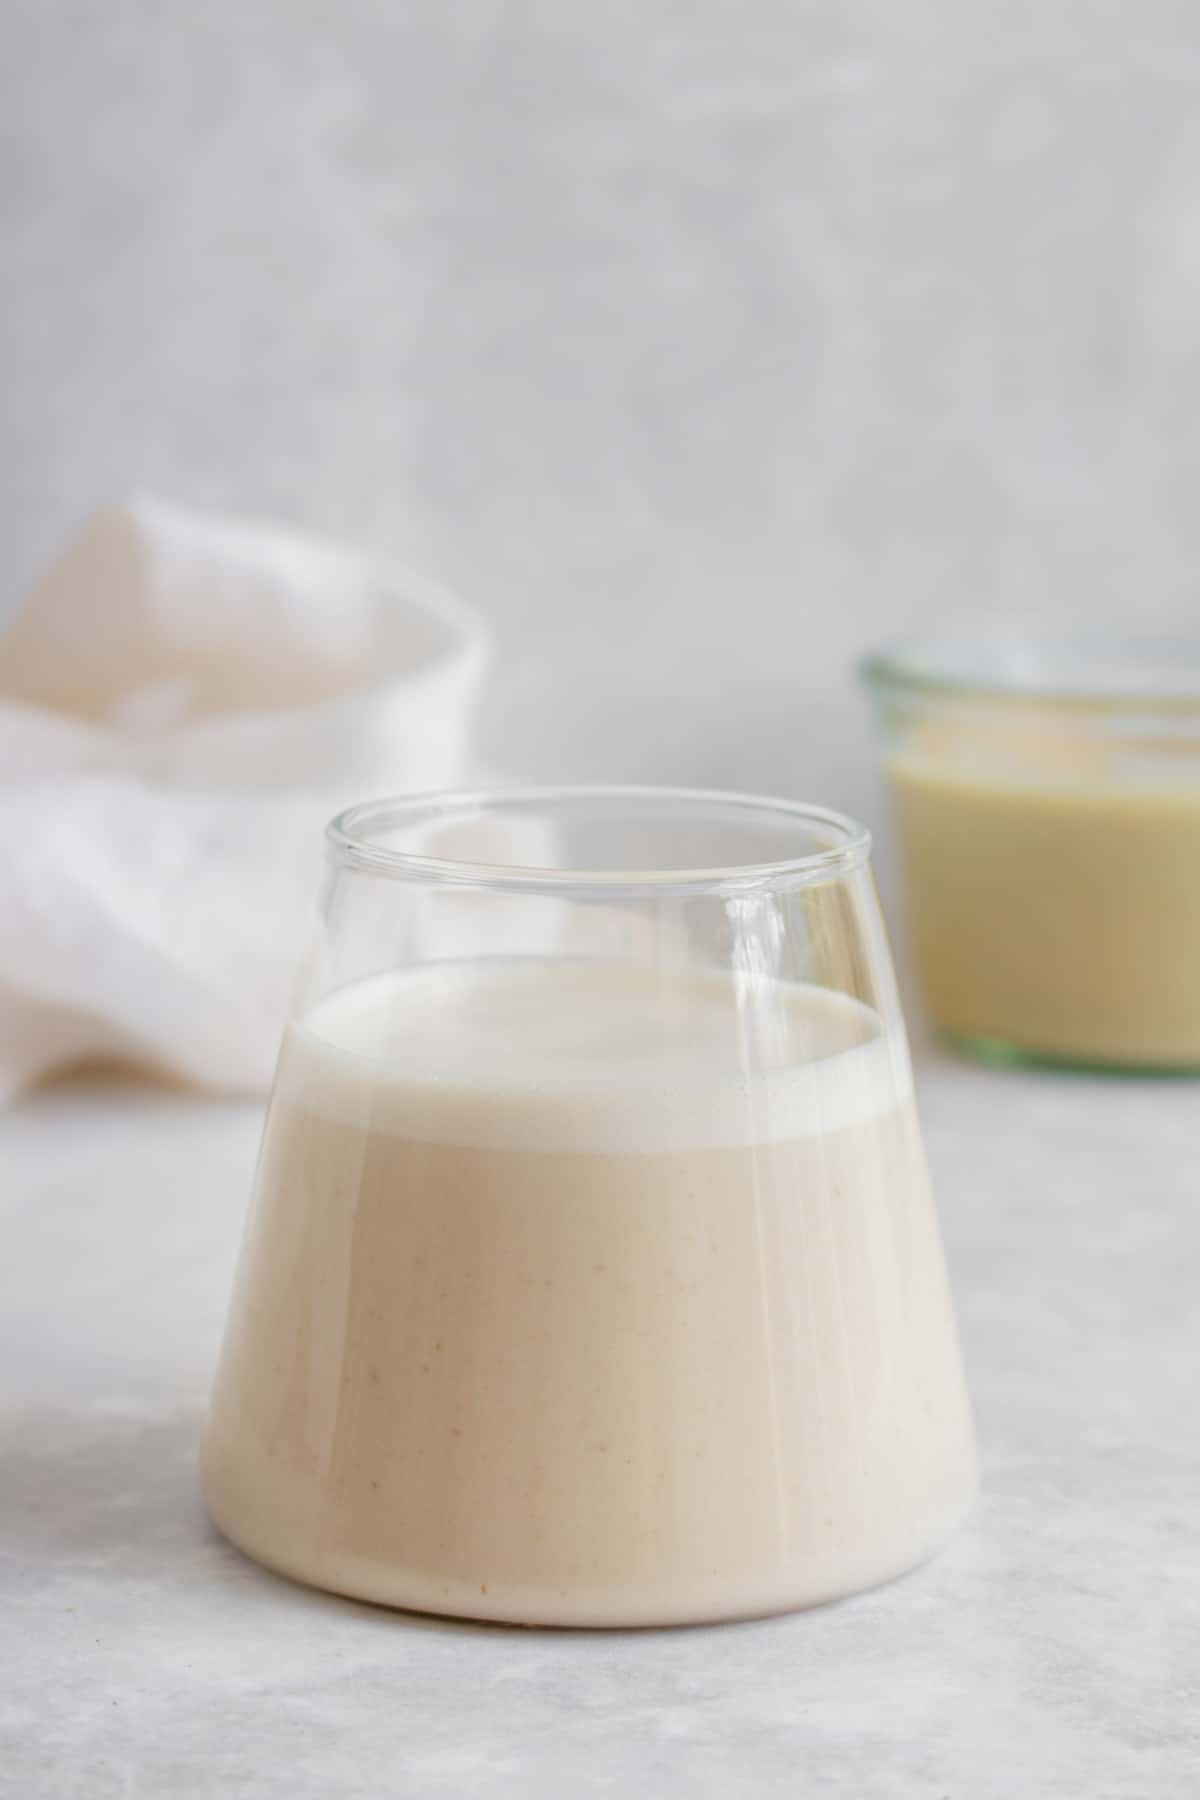 A cup of cashew milk.